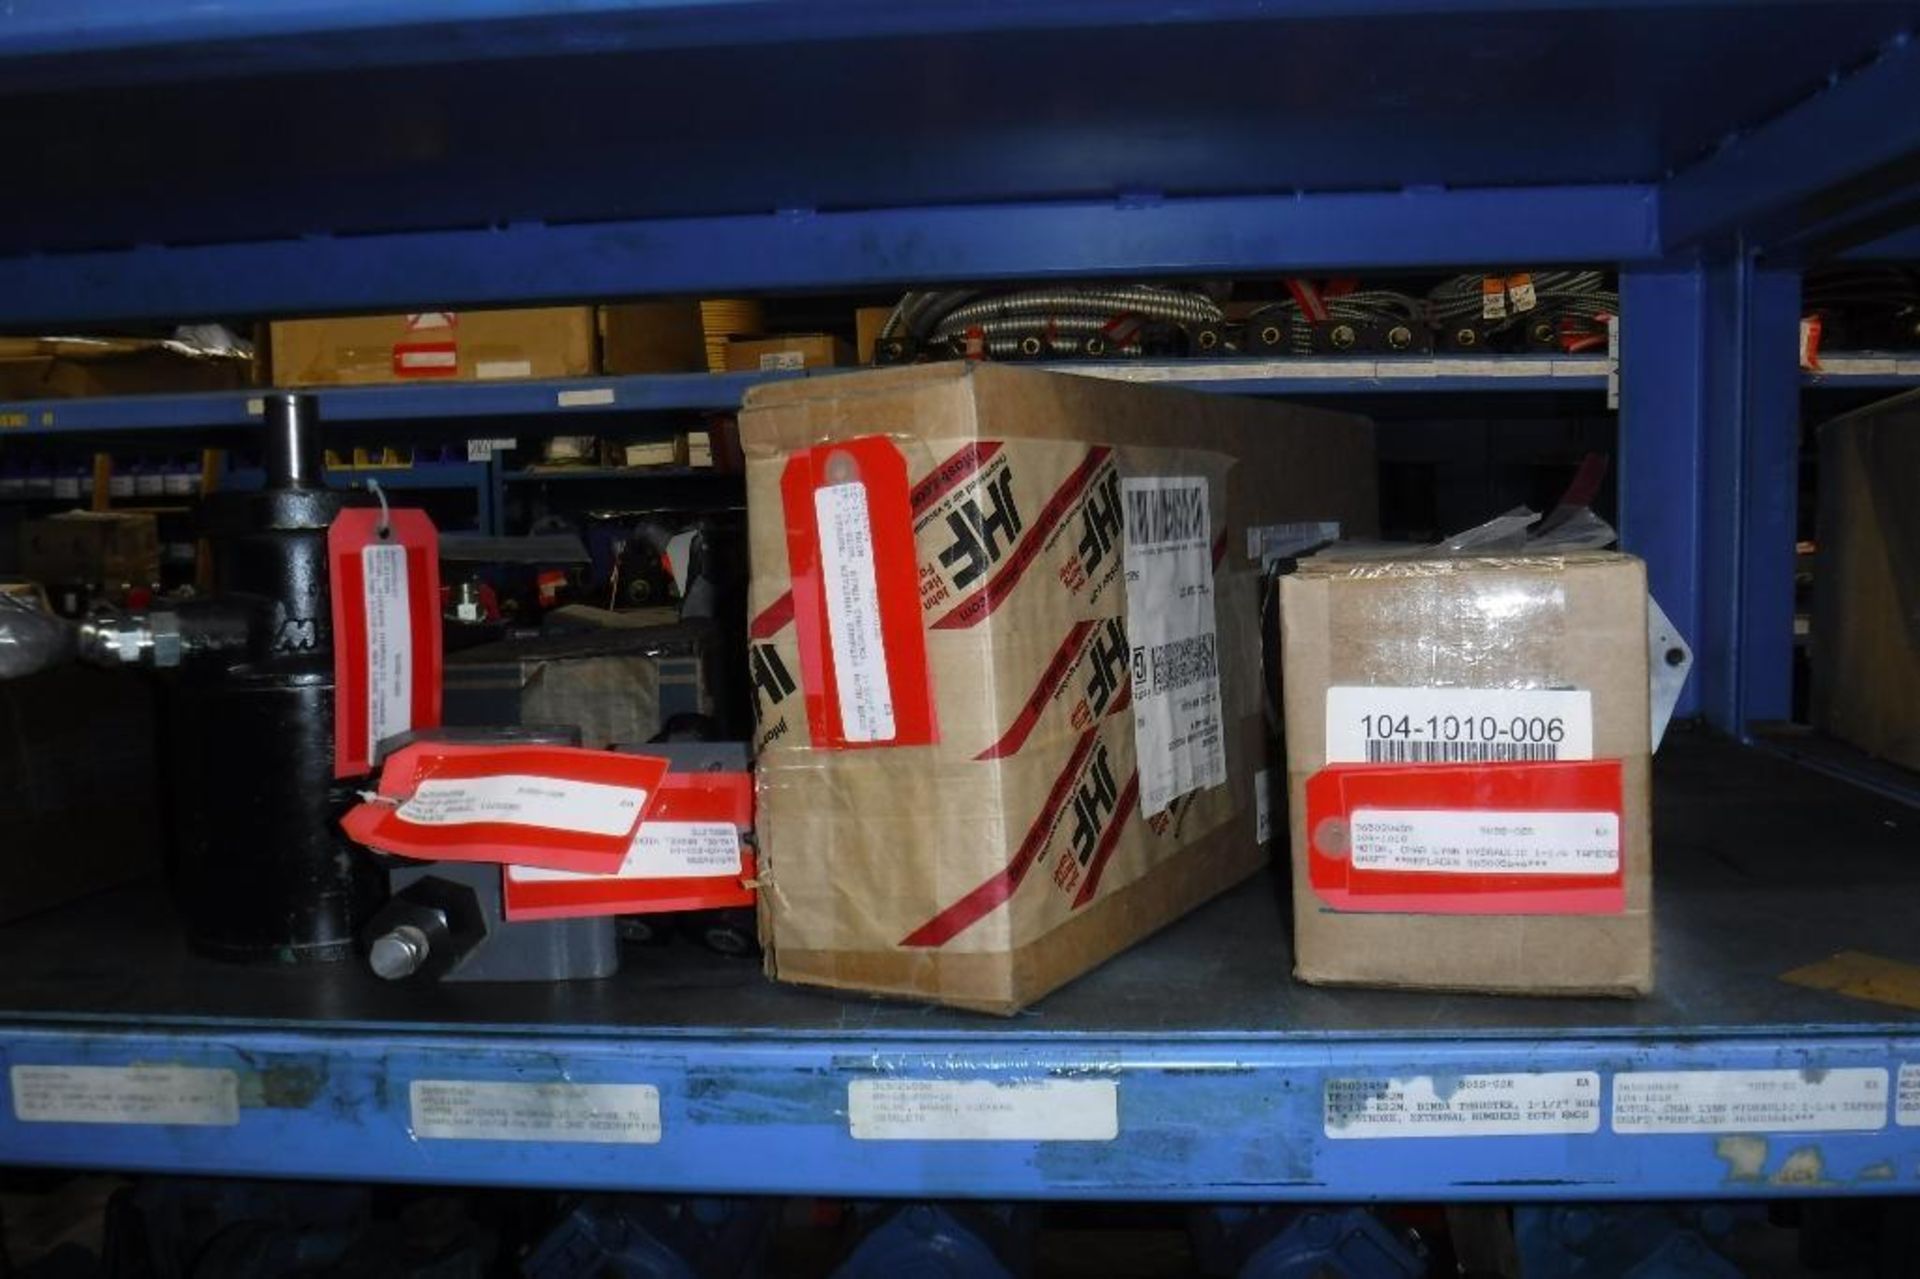 Contents of Rack 505S-Gear Boxes, Pumps, Etc., MUST REMOVE BY 2/14/20-MUST BE REMOVED IN THE ENTIRIT - Image 6 of 34